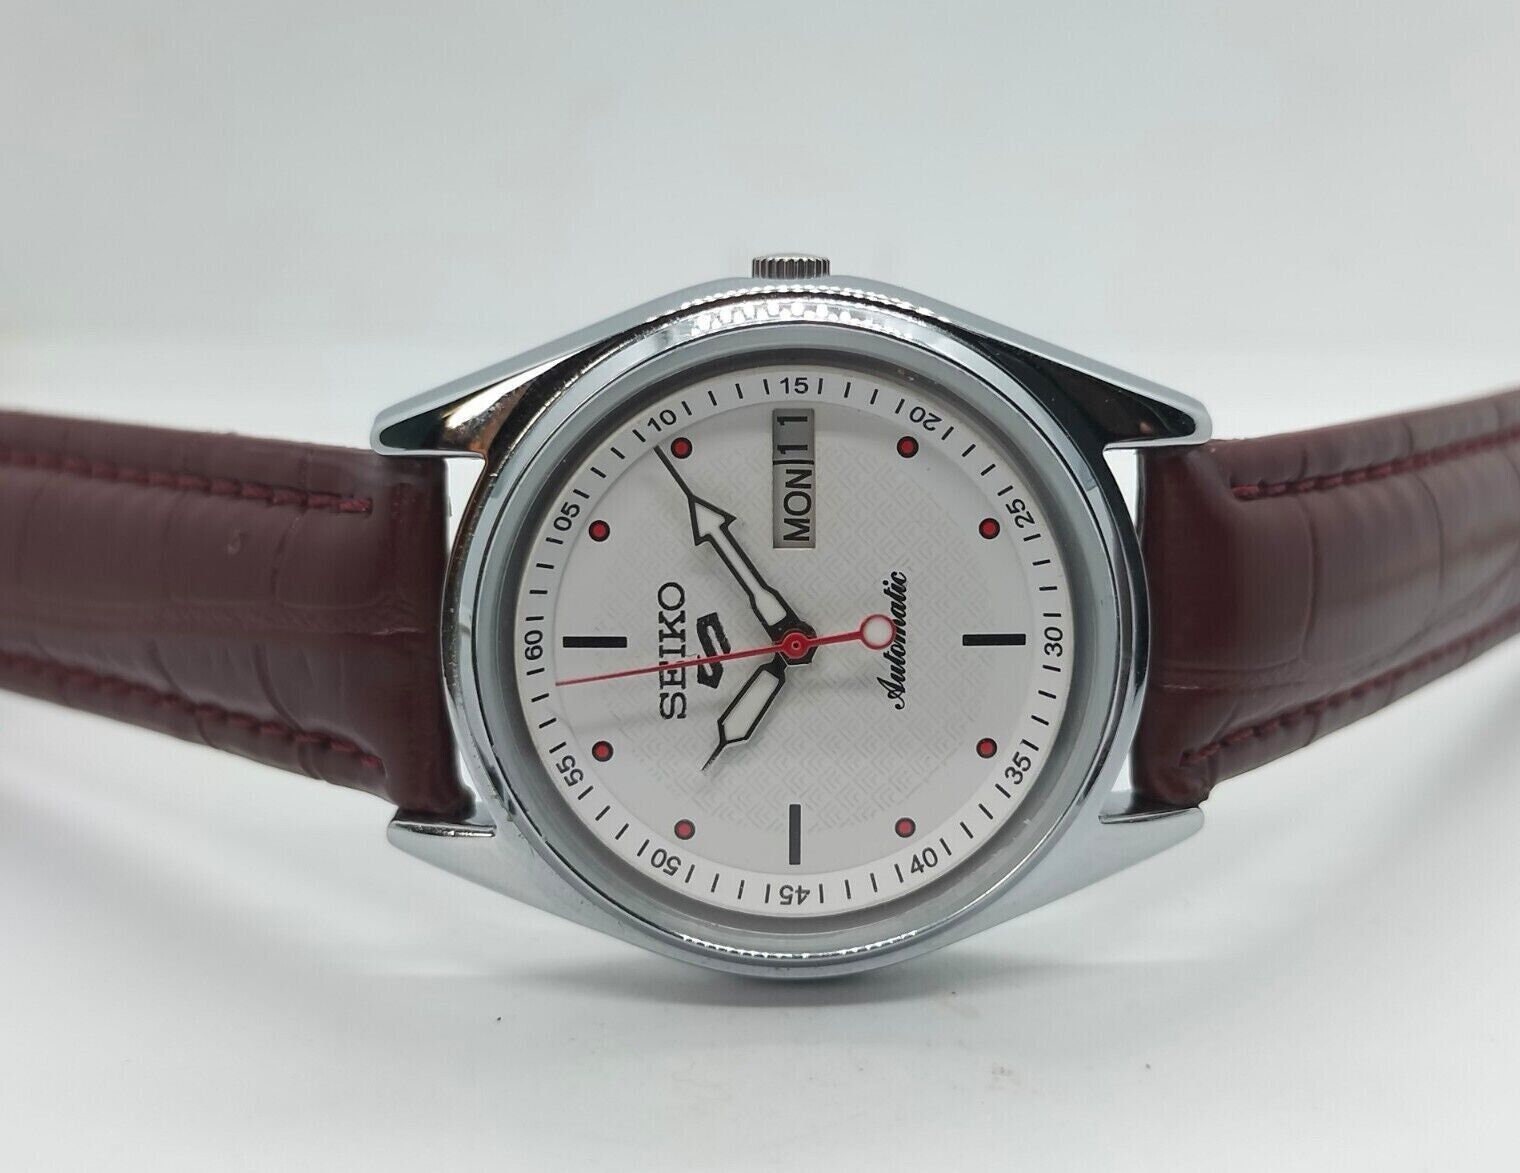 Used Seiko Watch - Etsy Sweden